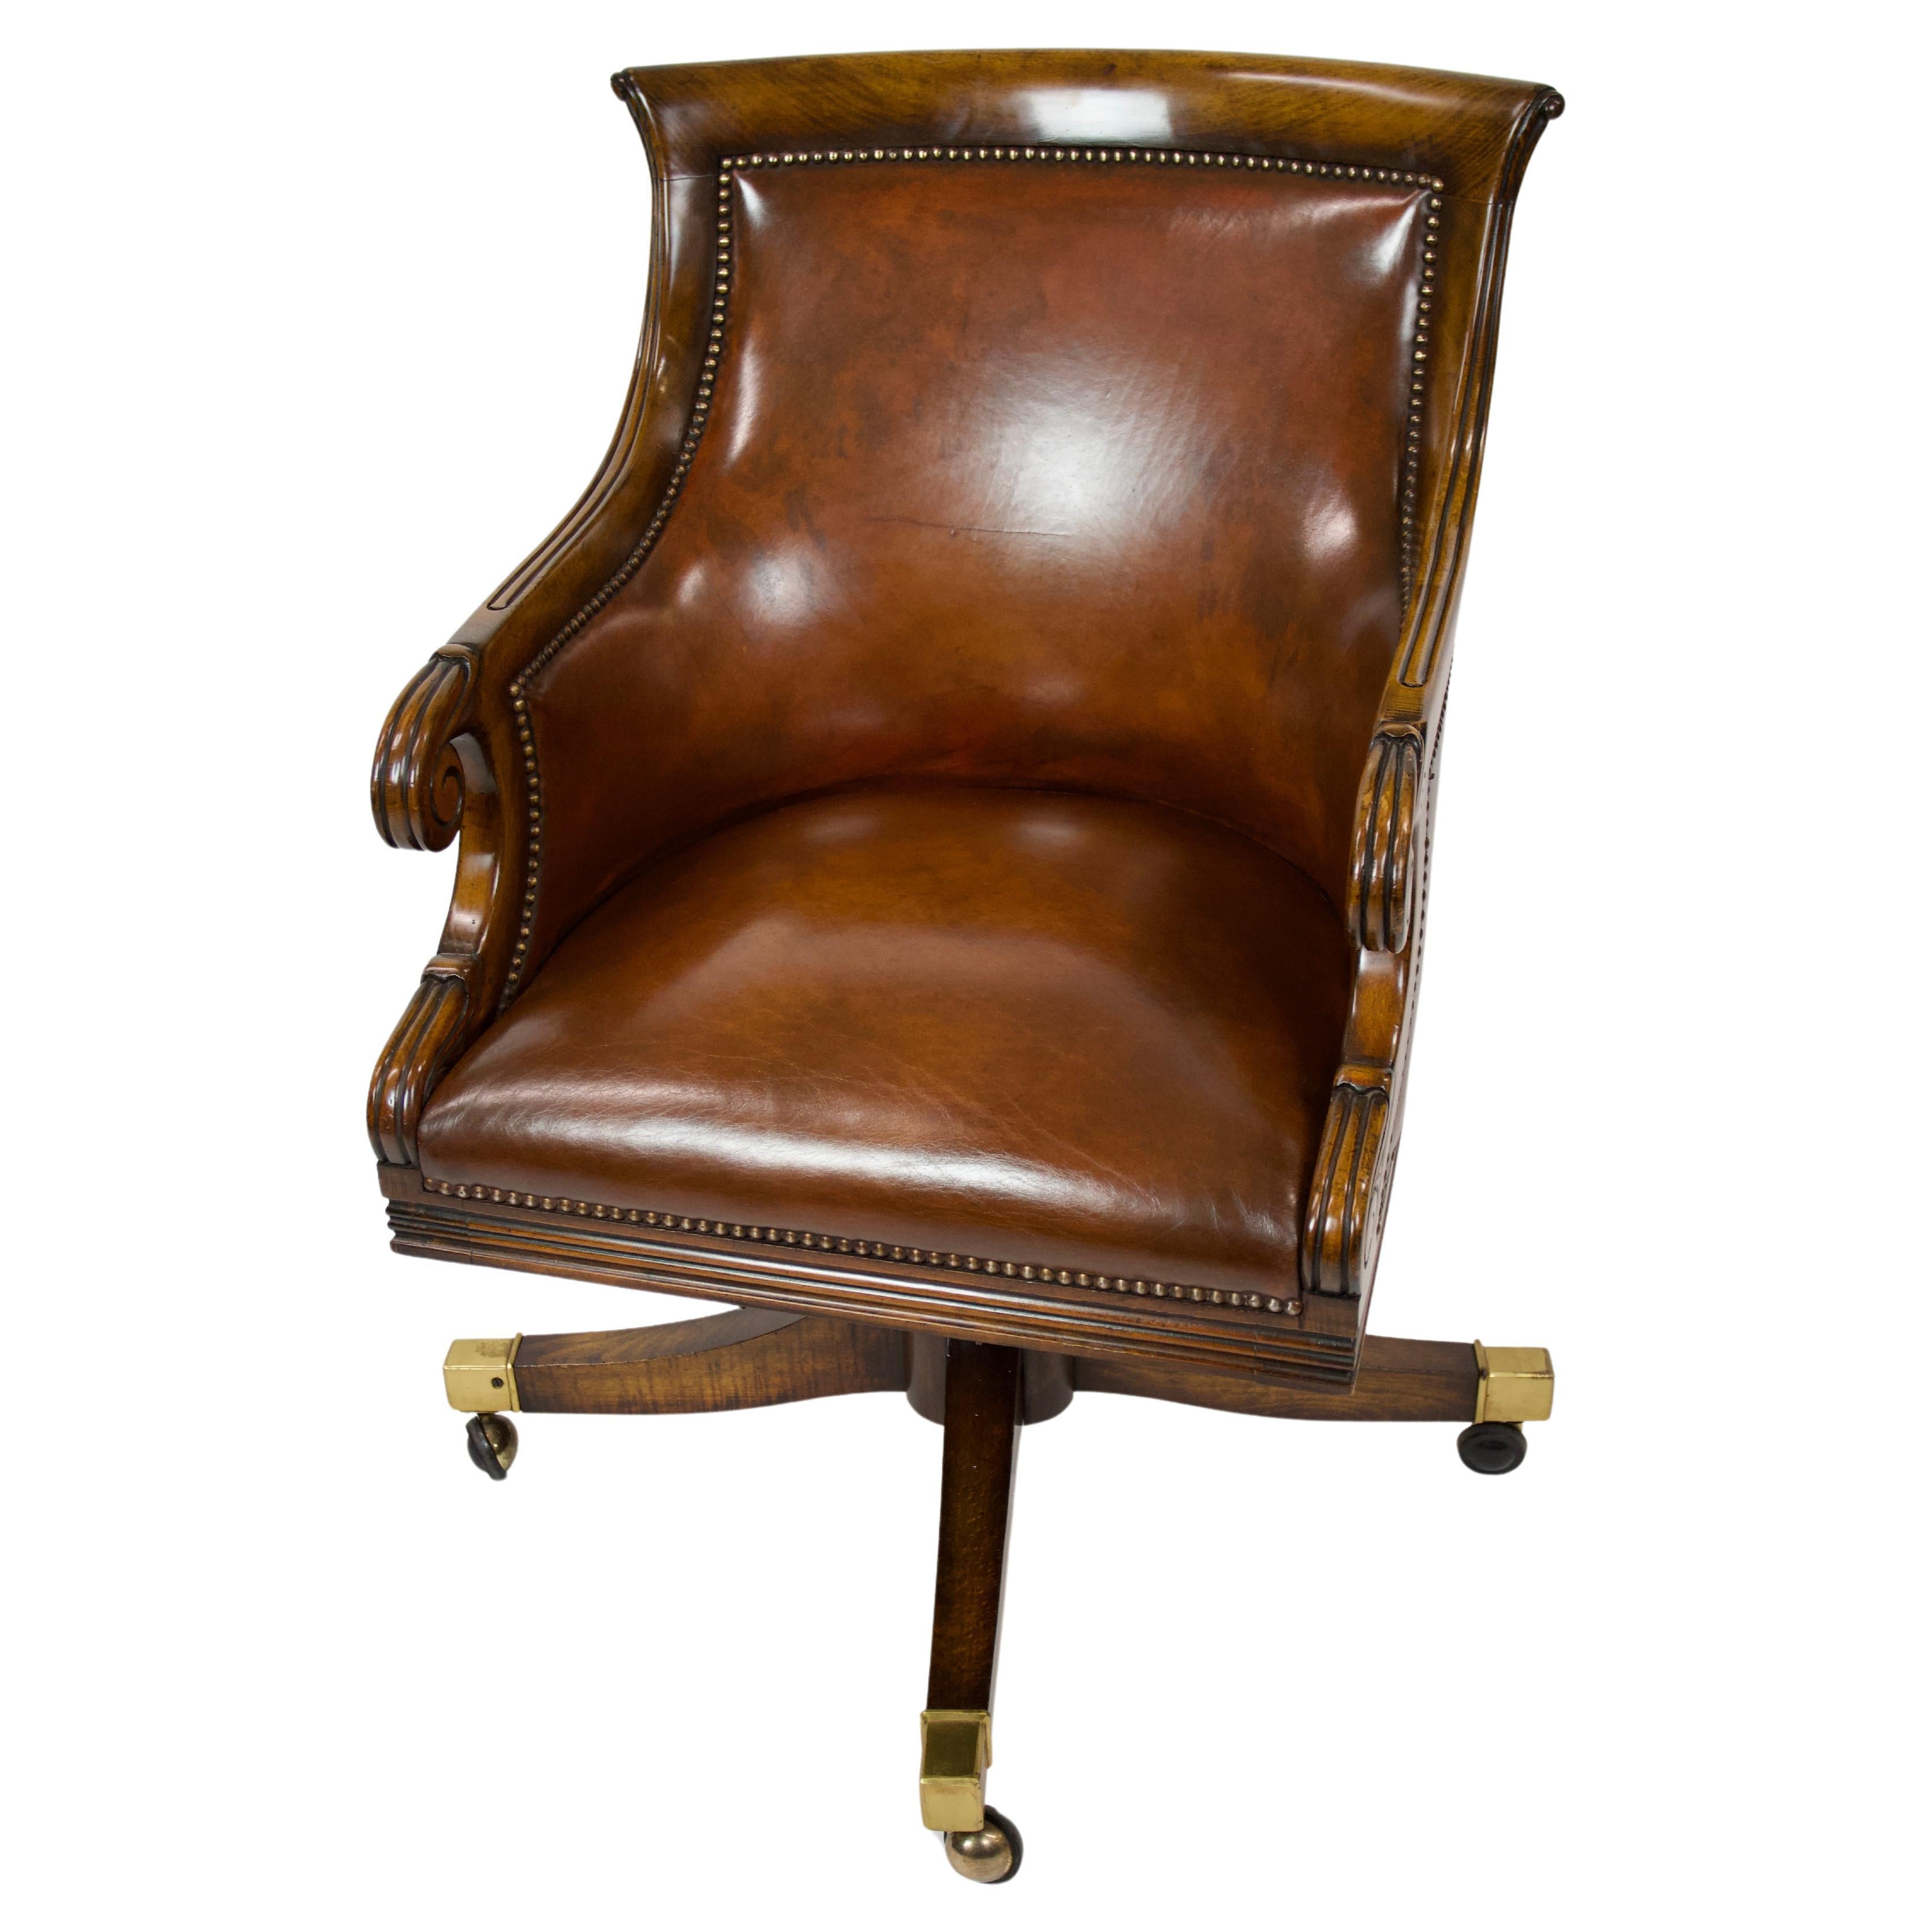  Fine W1V Style Mahogany & leather desk chair